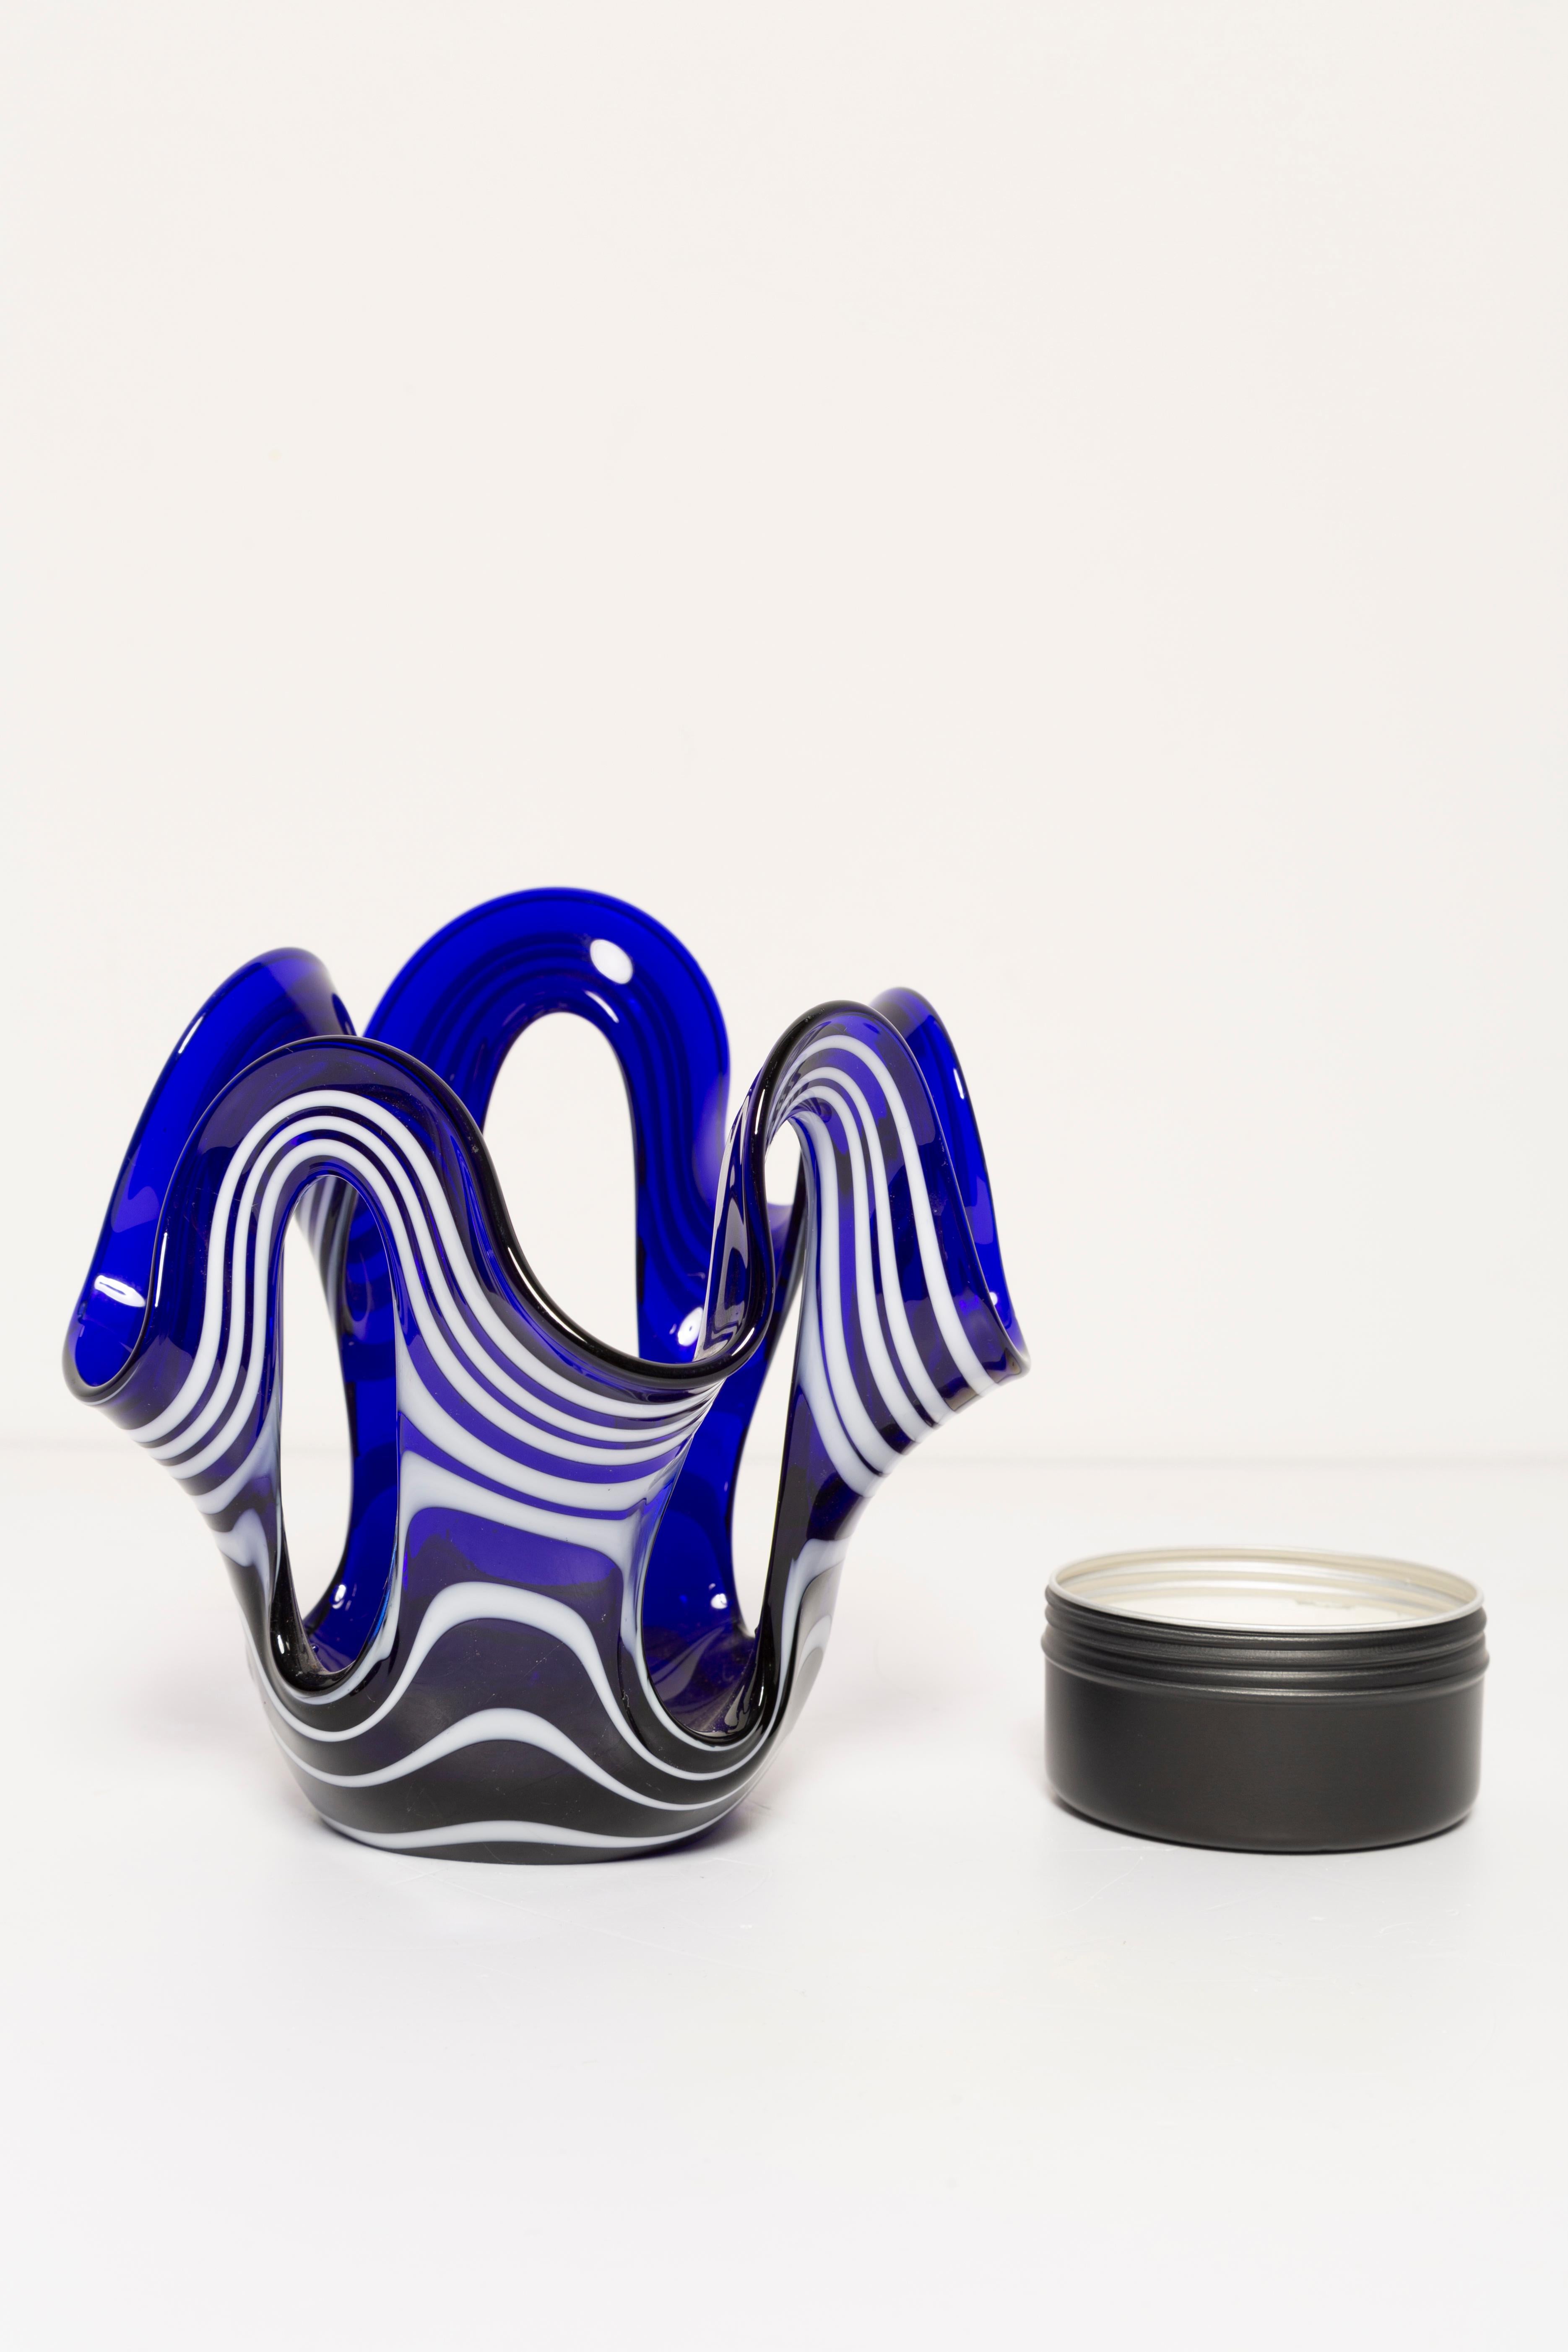 20th Century Small Mid-Century Ultramarine Blue and White Vase, Europe, 1960s For Sale